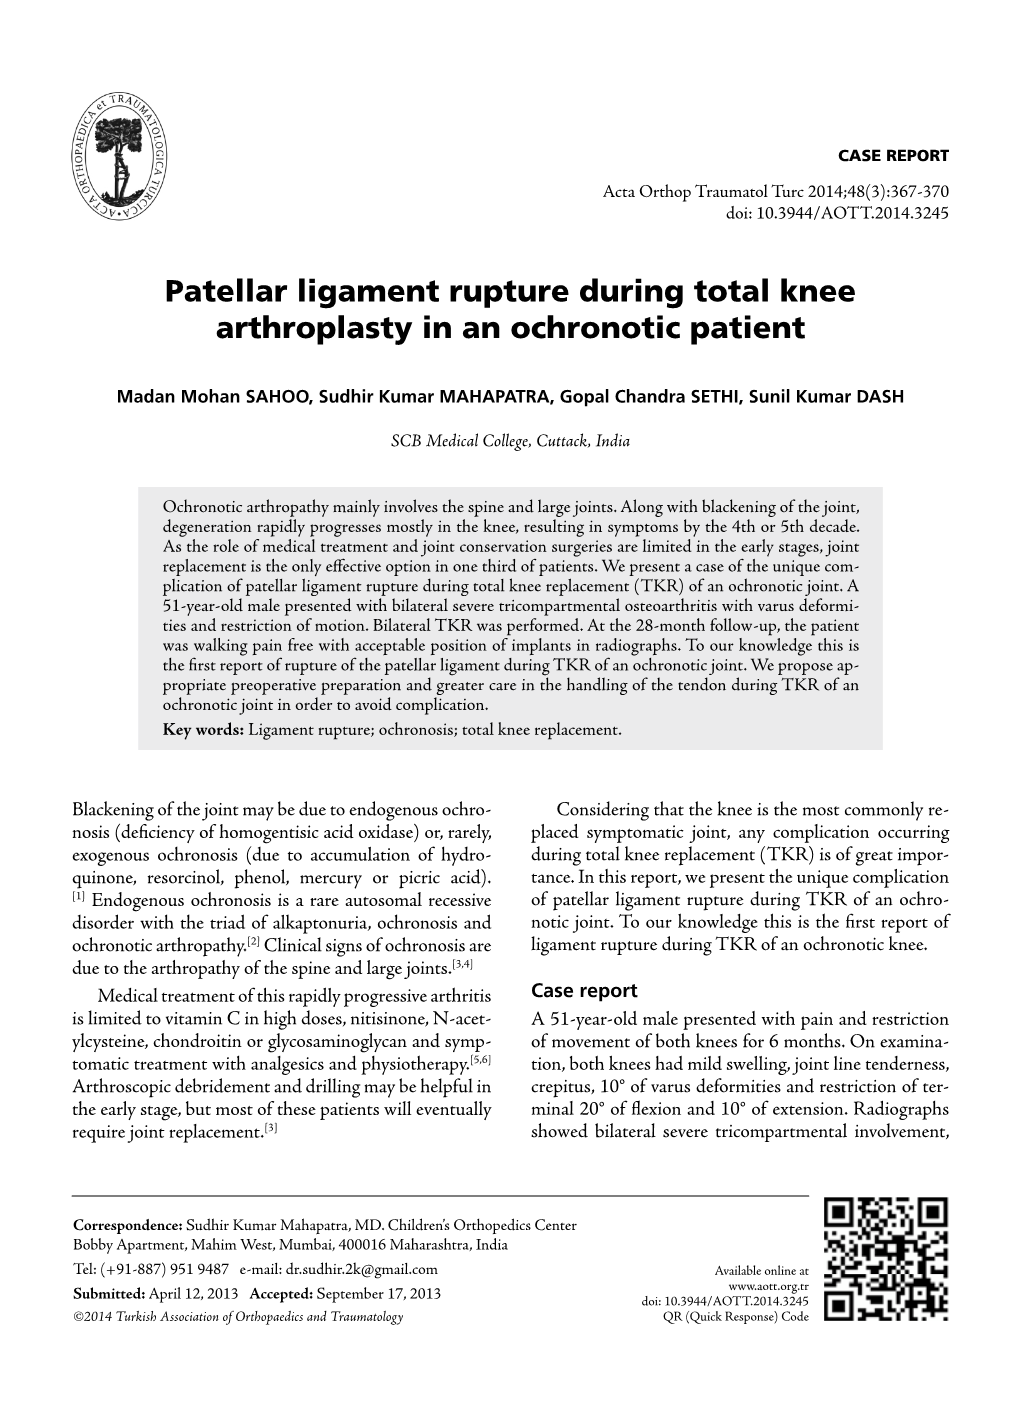 Patellar Ligament Rupture During Total Knee Arthroplasty in an Ochronotic Patient